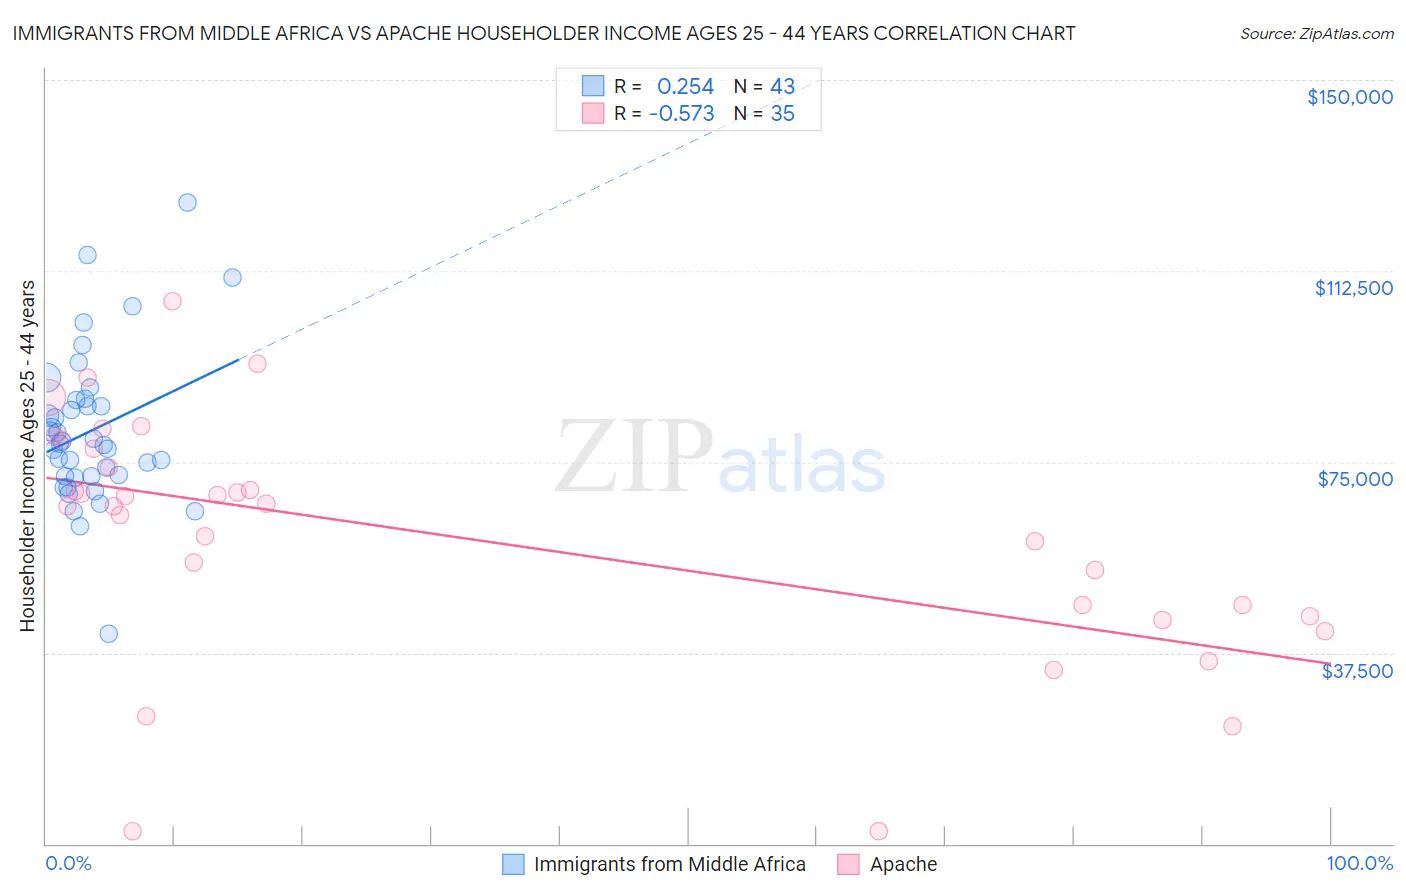 Immigrants from Middle Africa vs Apache Householder Income Ages 25 - 44 years